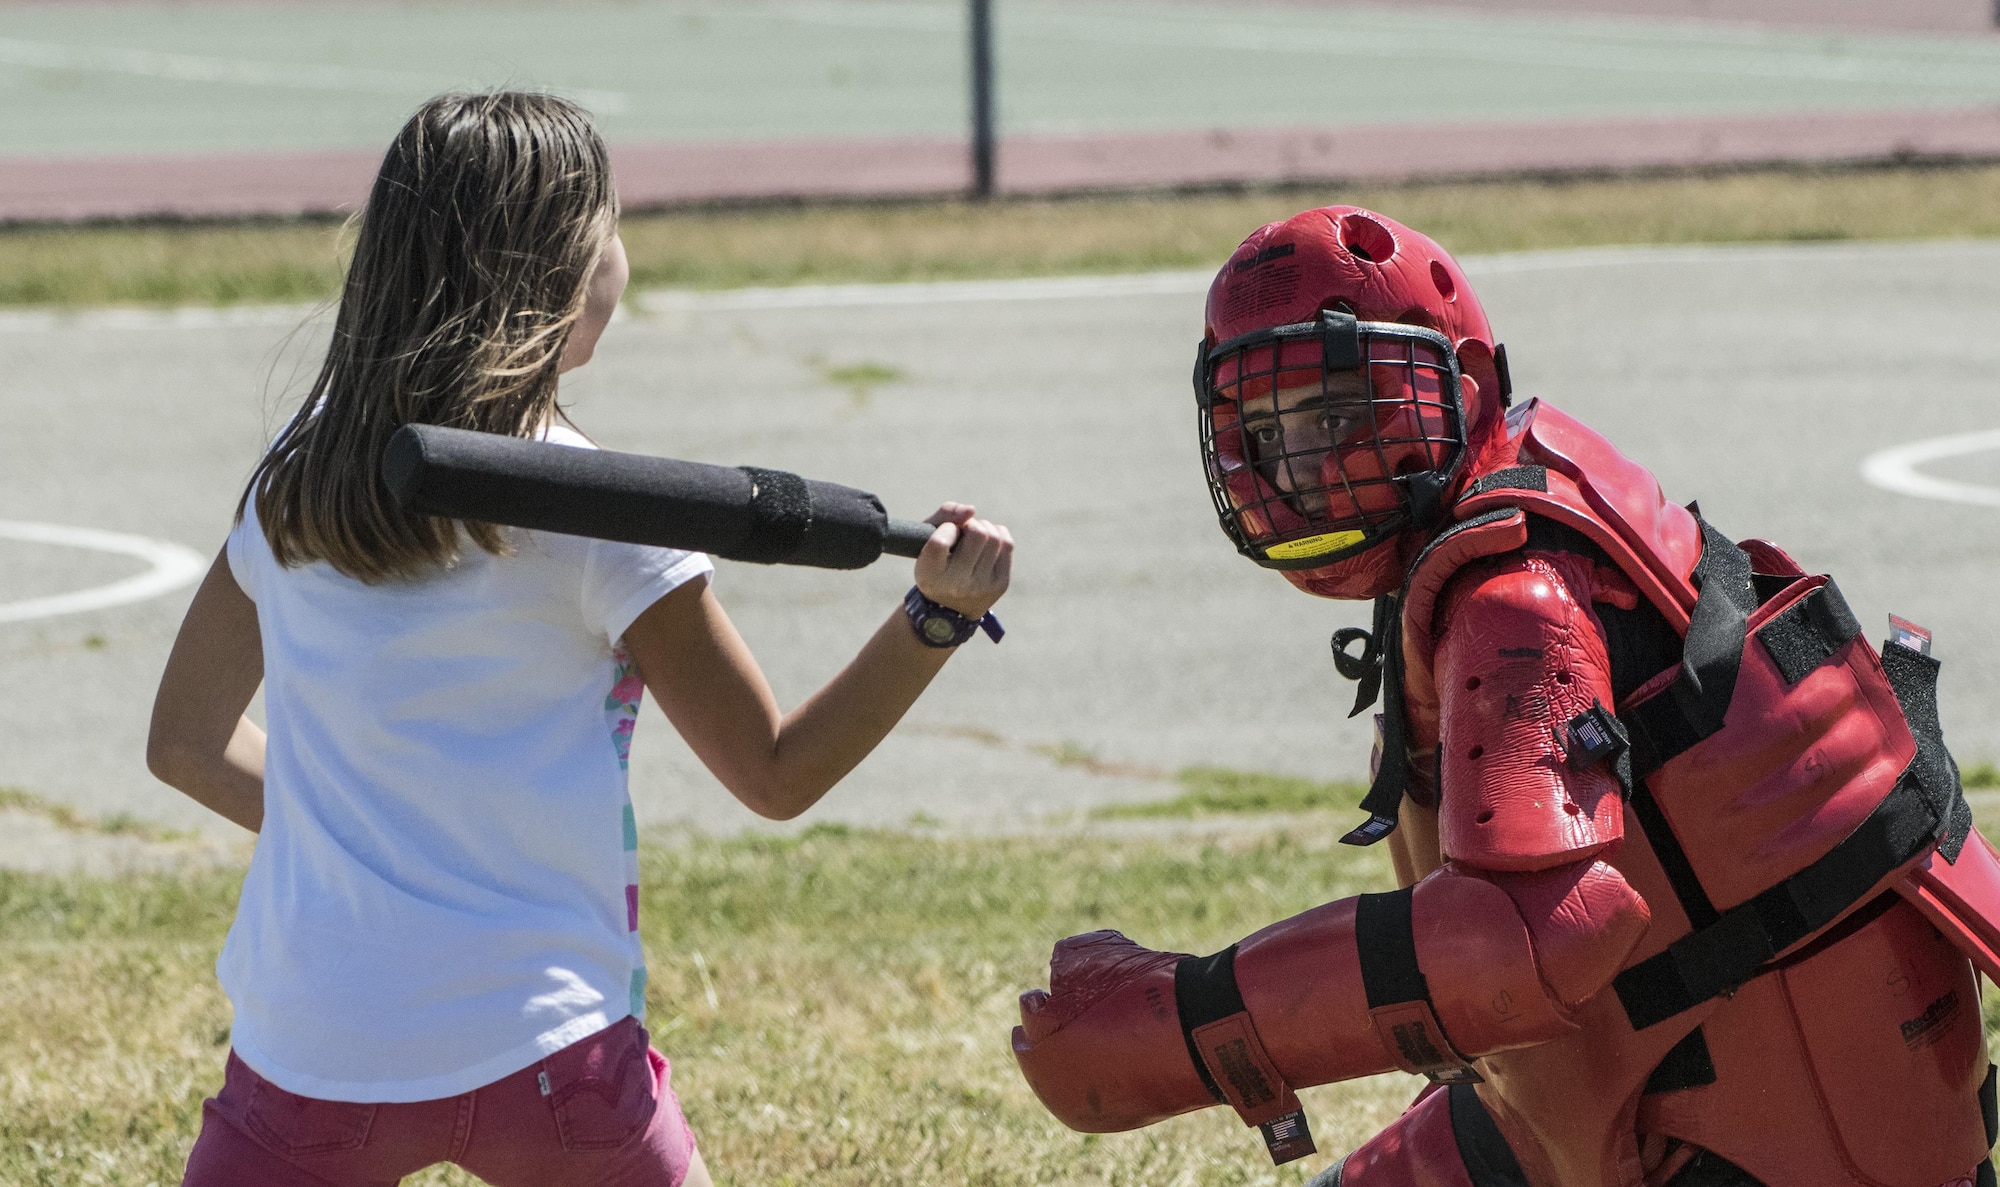 Children had the opportunity to try and take down a 60th Security Forces Squadron defender wearing the Red-Man suit used for defensive tactics training during the National Police Week Picnic, May 17, 2017 at Travis Air Force Base, Calif. Established by a joint resolution of Congress in 1962, National Police Week pays special recognition to law enforcement officers who have lost their lives in the line of duty for the safety and protection of others. Police Week gives the 60th SFS an opportunity to inform, educate and strengthen Travis community relations. (U.S. Air Force photo/ Heide Couch)